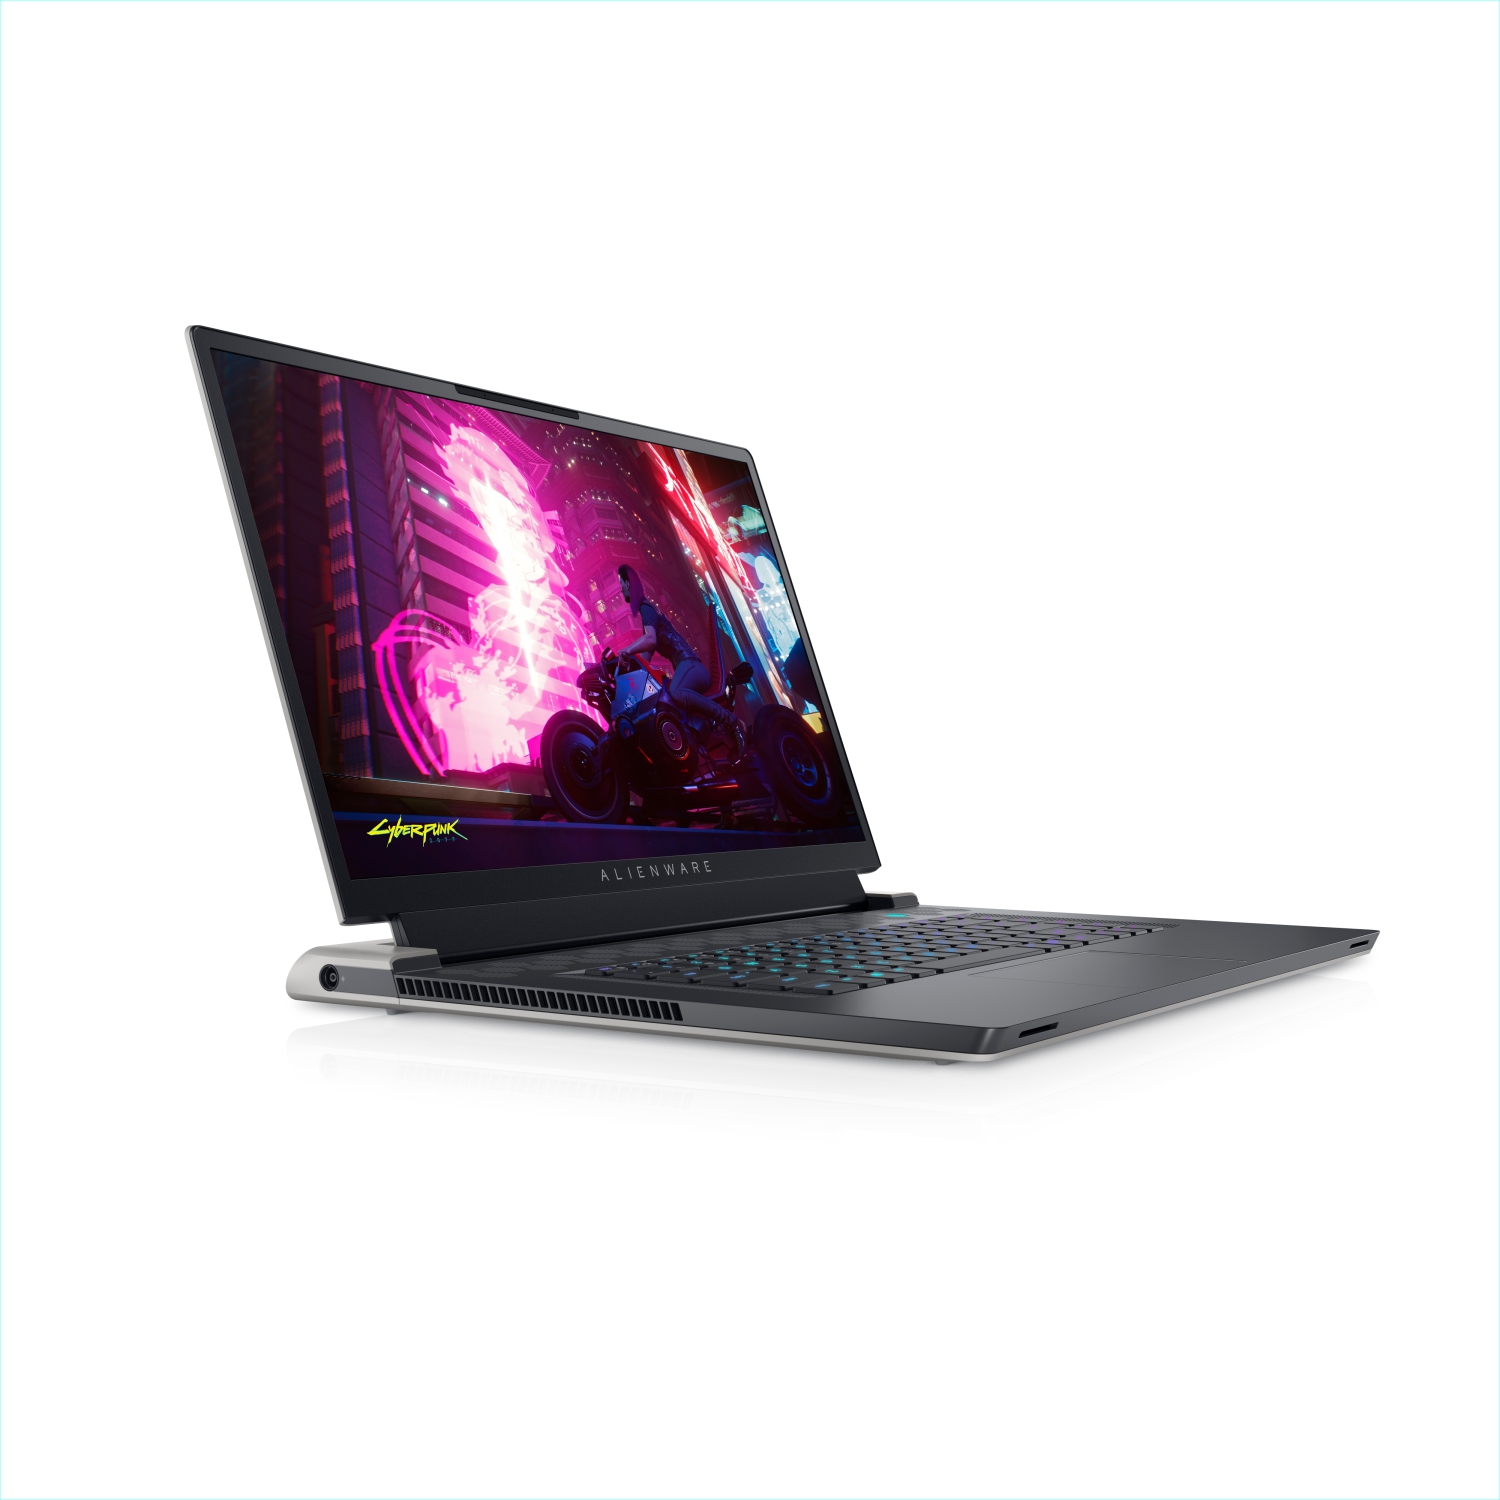 Dell Alienware X17 R1 Gaming Laptop (2021) | 17.3" FHD | Core i7 - 1TB SSD + 512GB SSD - 64GB RAM - RTX 3060 | 8 Cores @ 4.6 GHz - 11th Gen CPU - 12GB GDDR6 Certified Refurbished